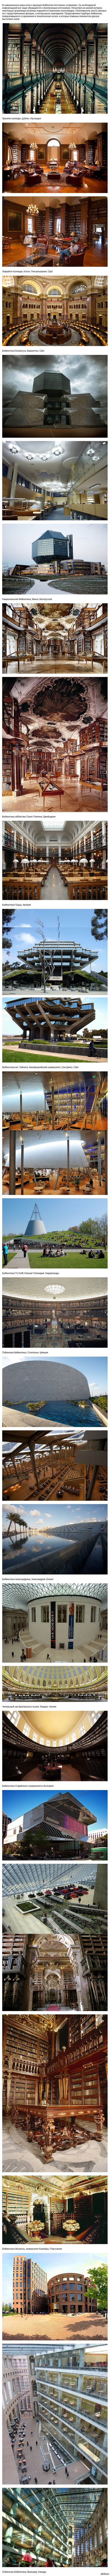 The most beautiful libraries in the world - Architecture, Library, beauty, Interior